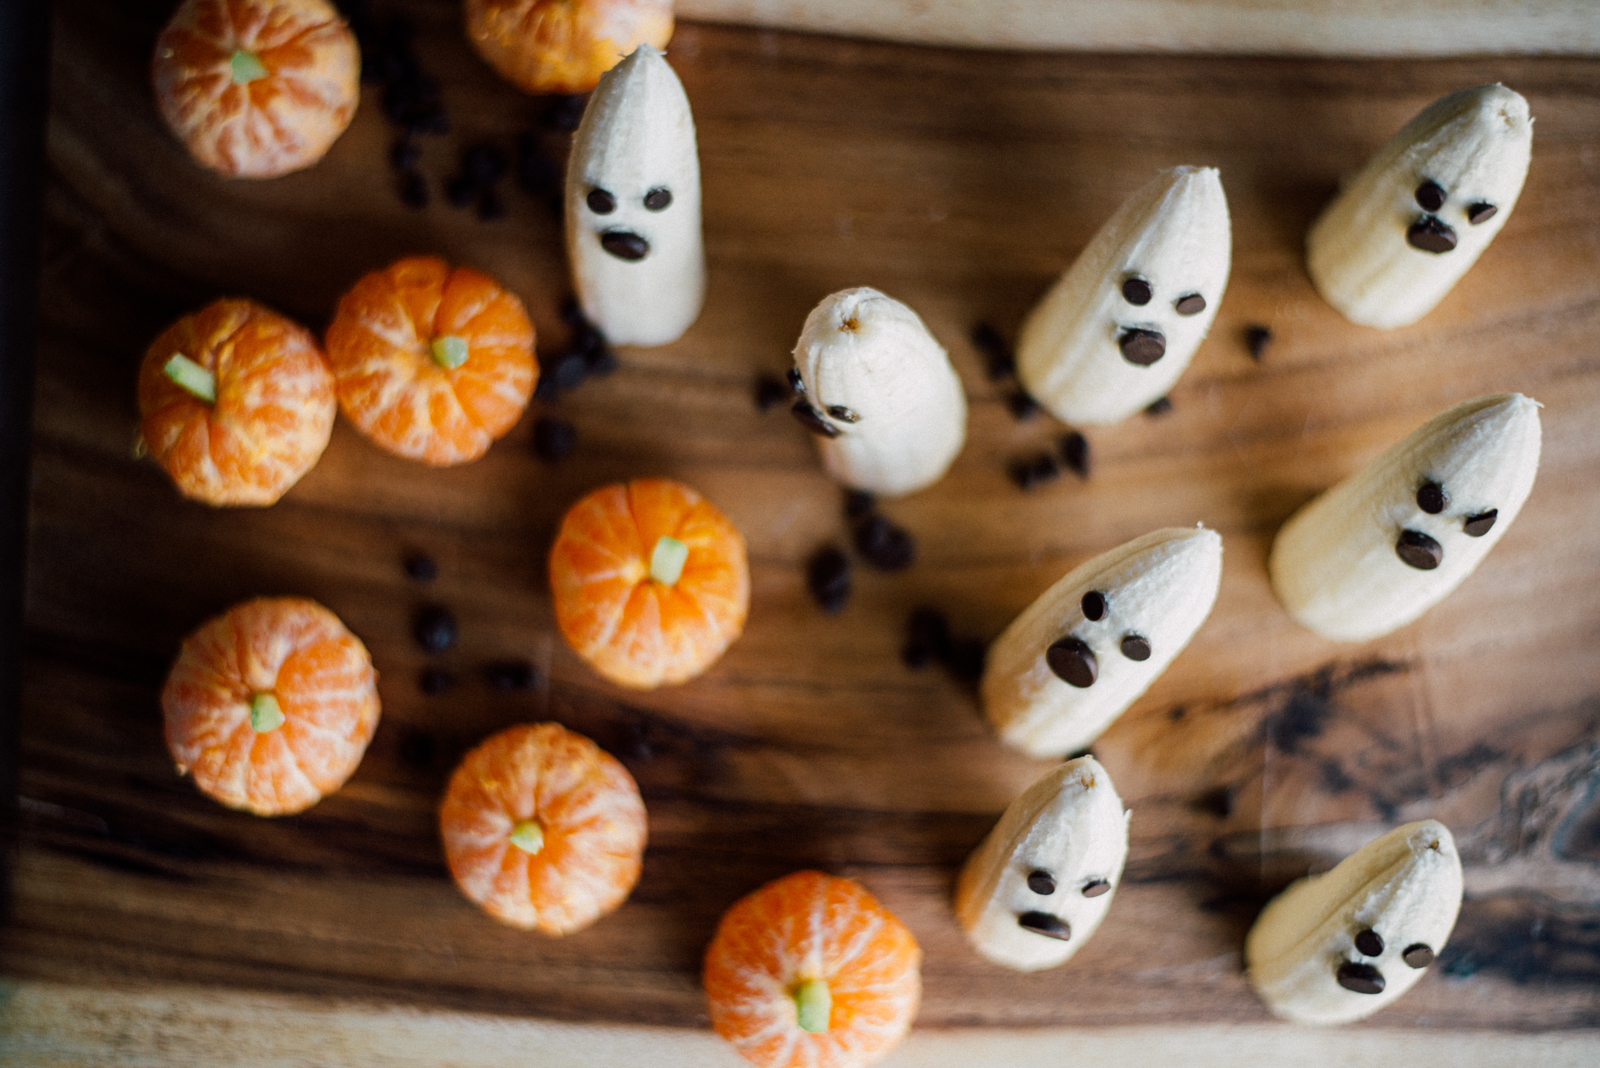 tangerines with celery sticks turned into edible pumpkins with banana ghosts and chocolate chips